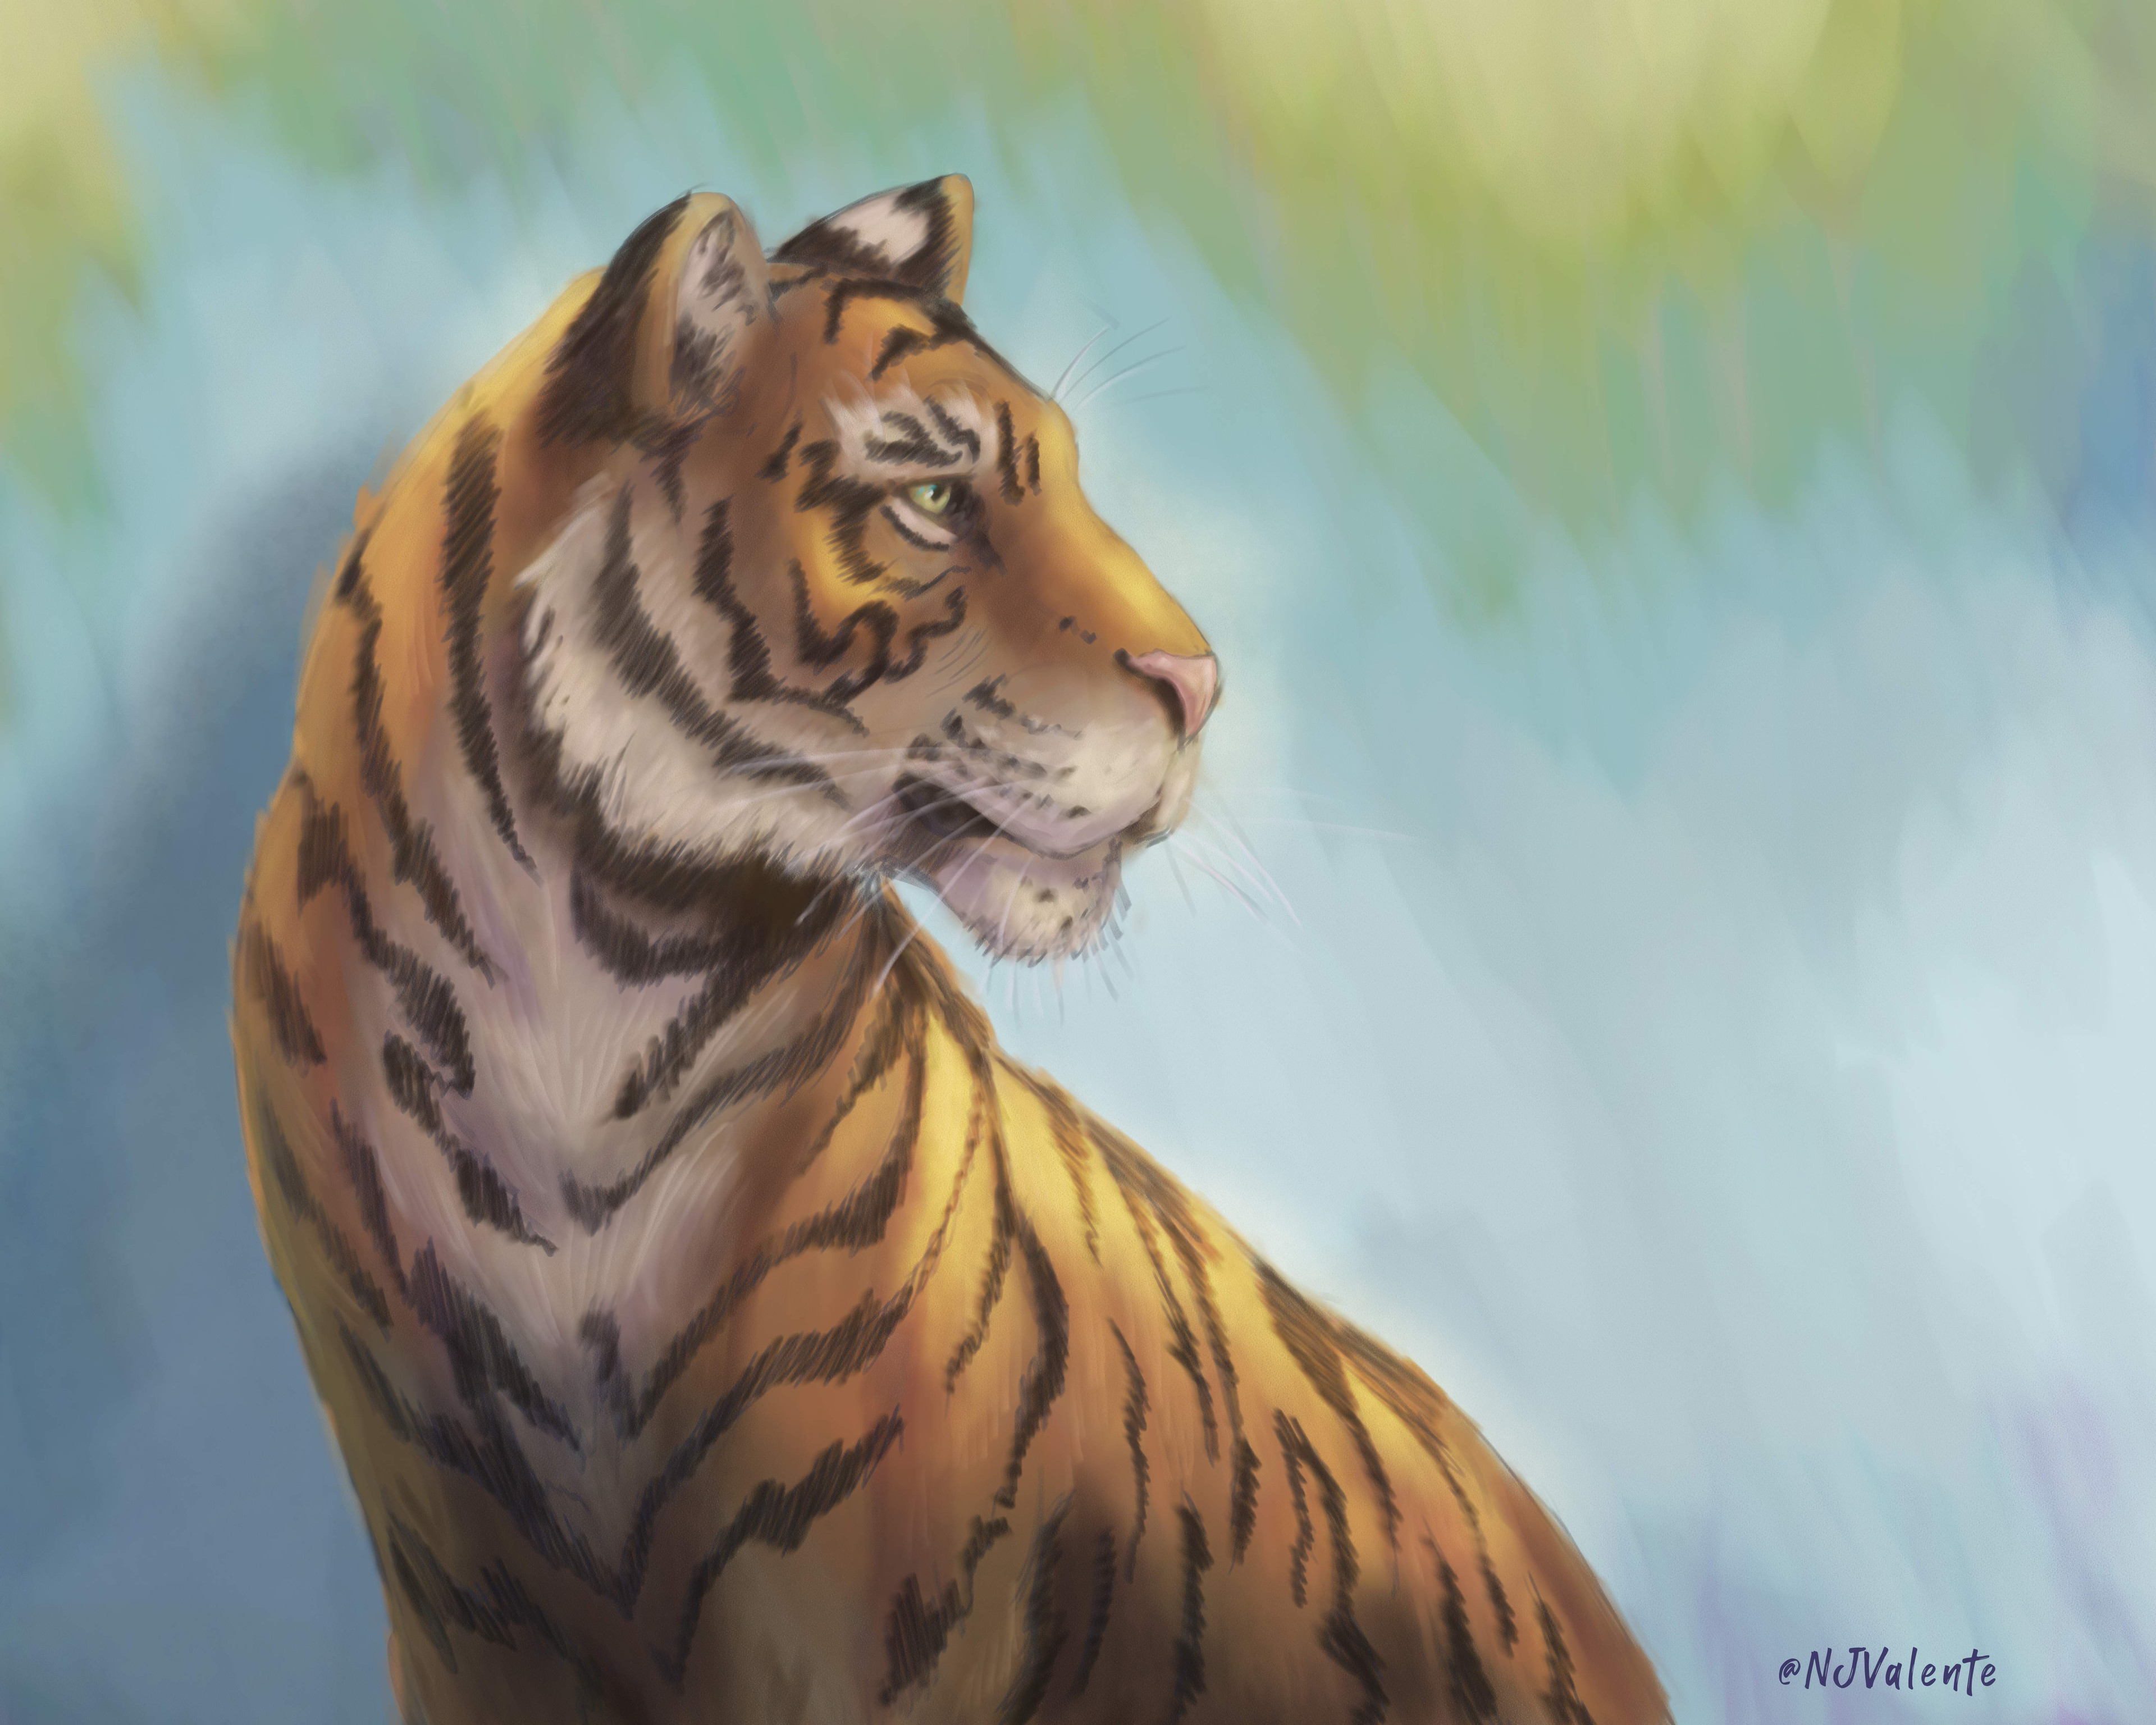 Tiger digital painting done in Corel Painter.